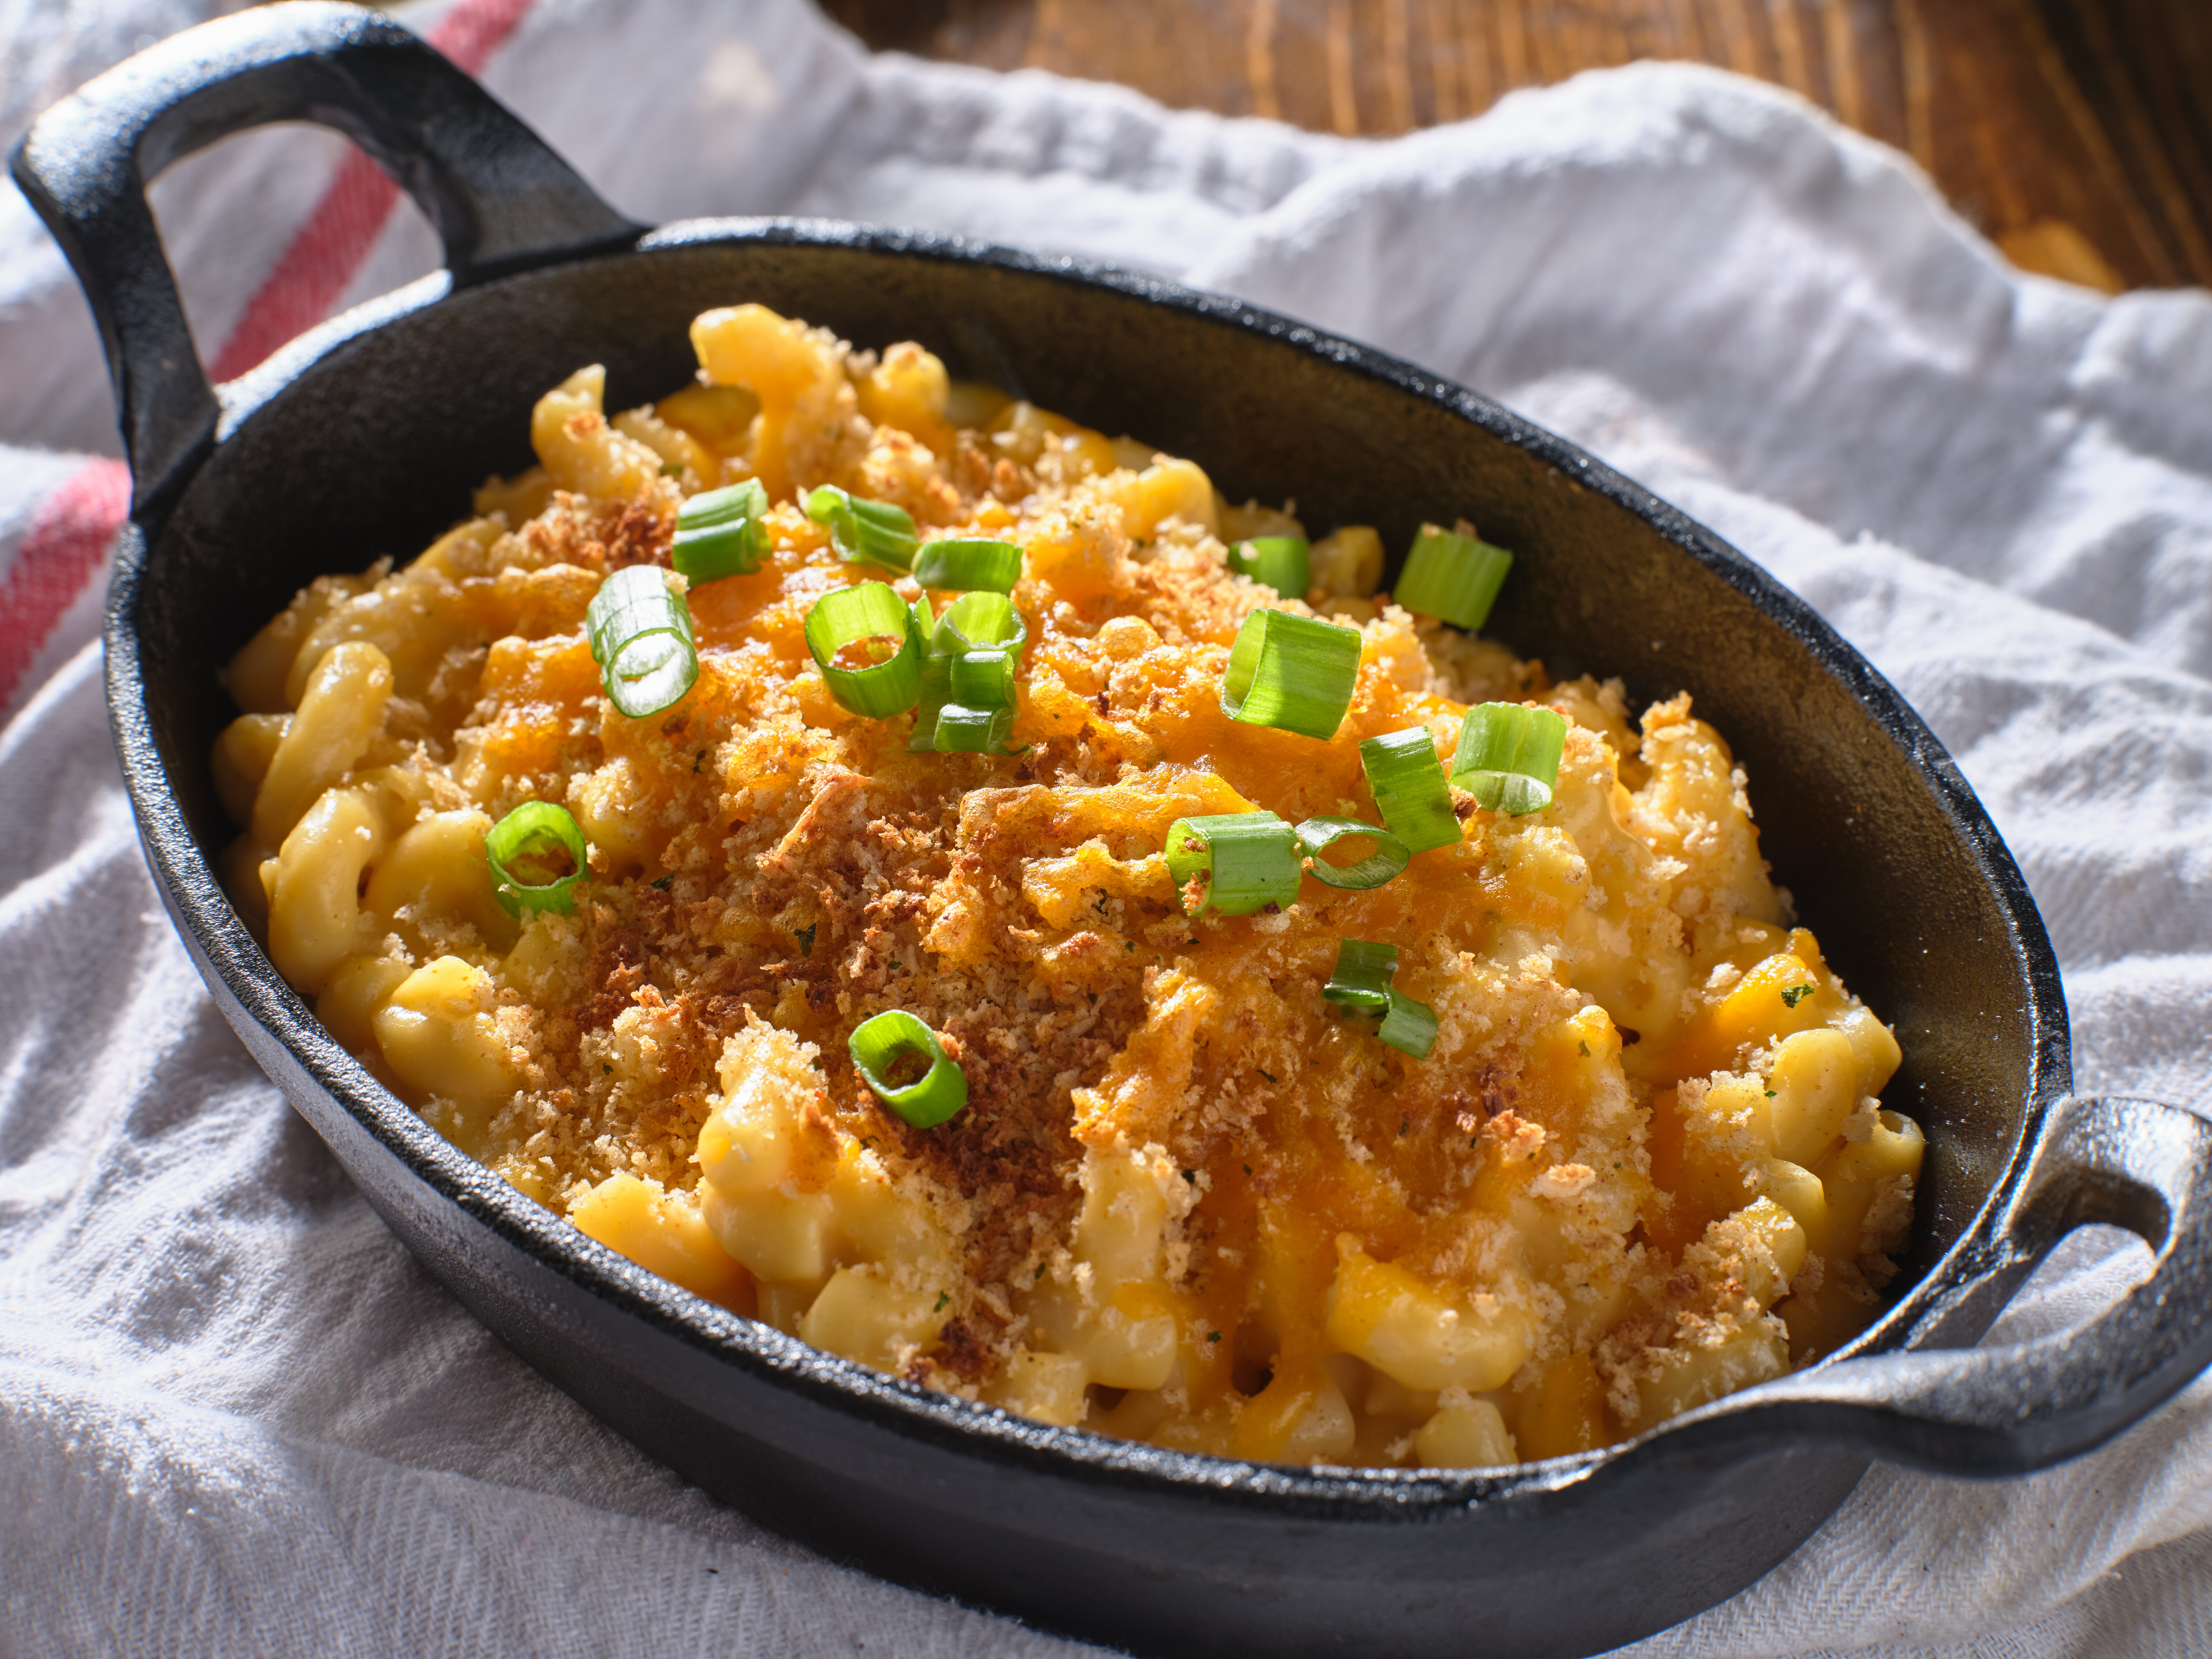 macaroni-and-cheese-baked-in-cast-iron-skillet-2